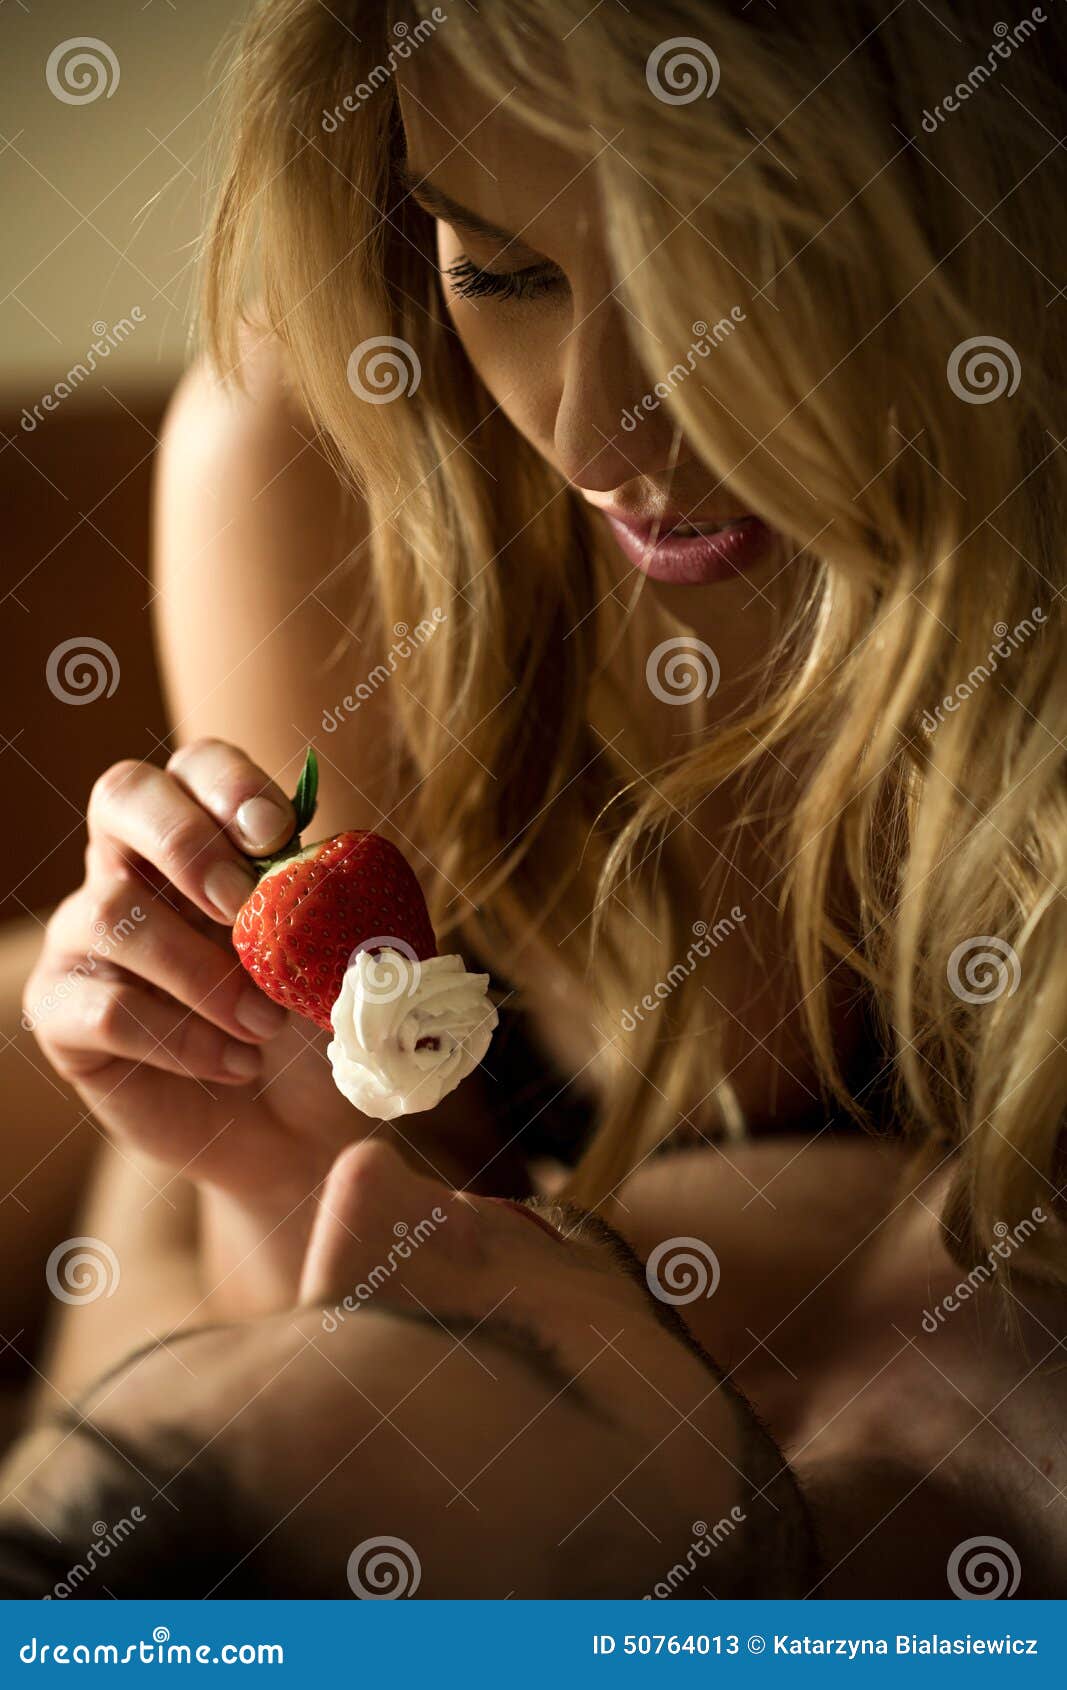 Strawberry with Whipped Cream Stock Image - Image of romance